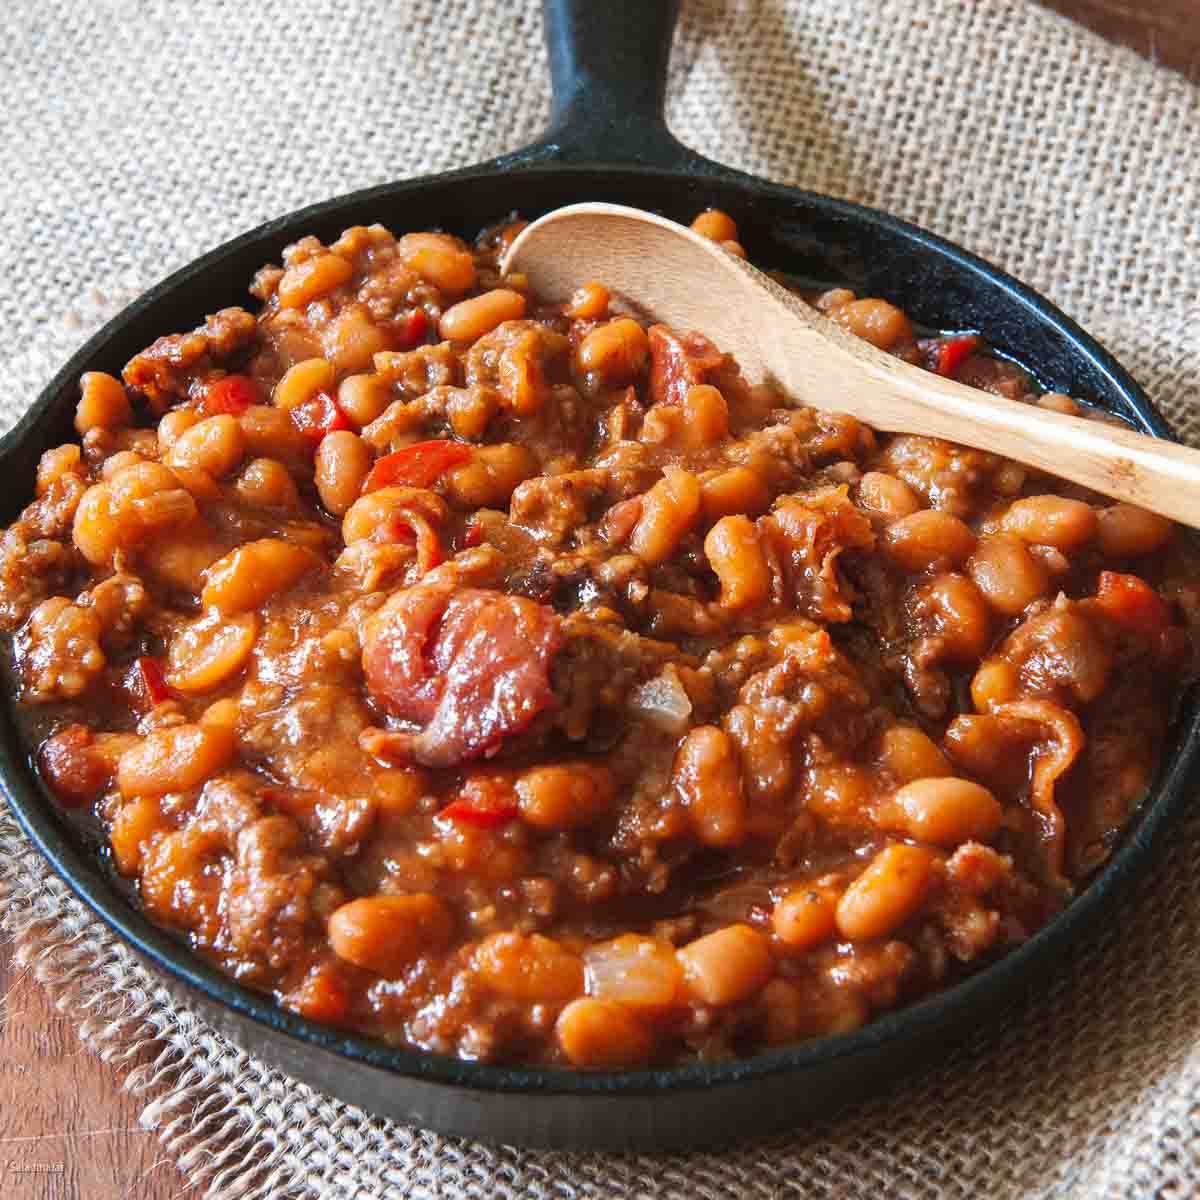 baked beans with hamburger in a black skillet with wooden spoon